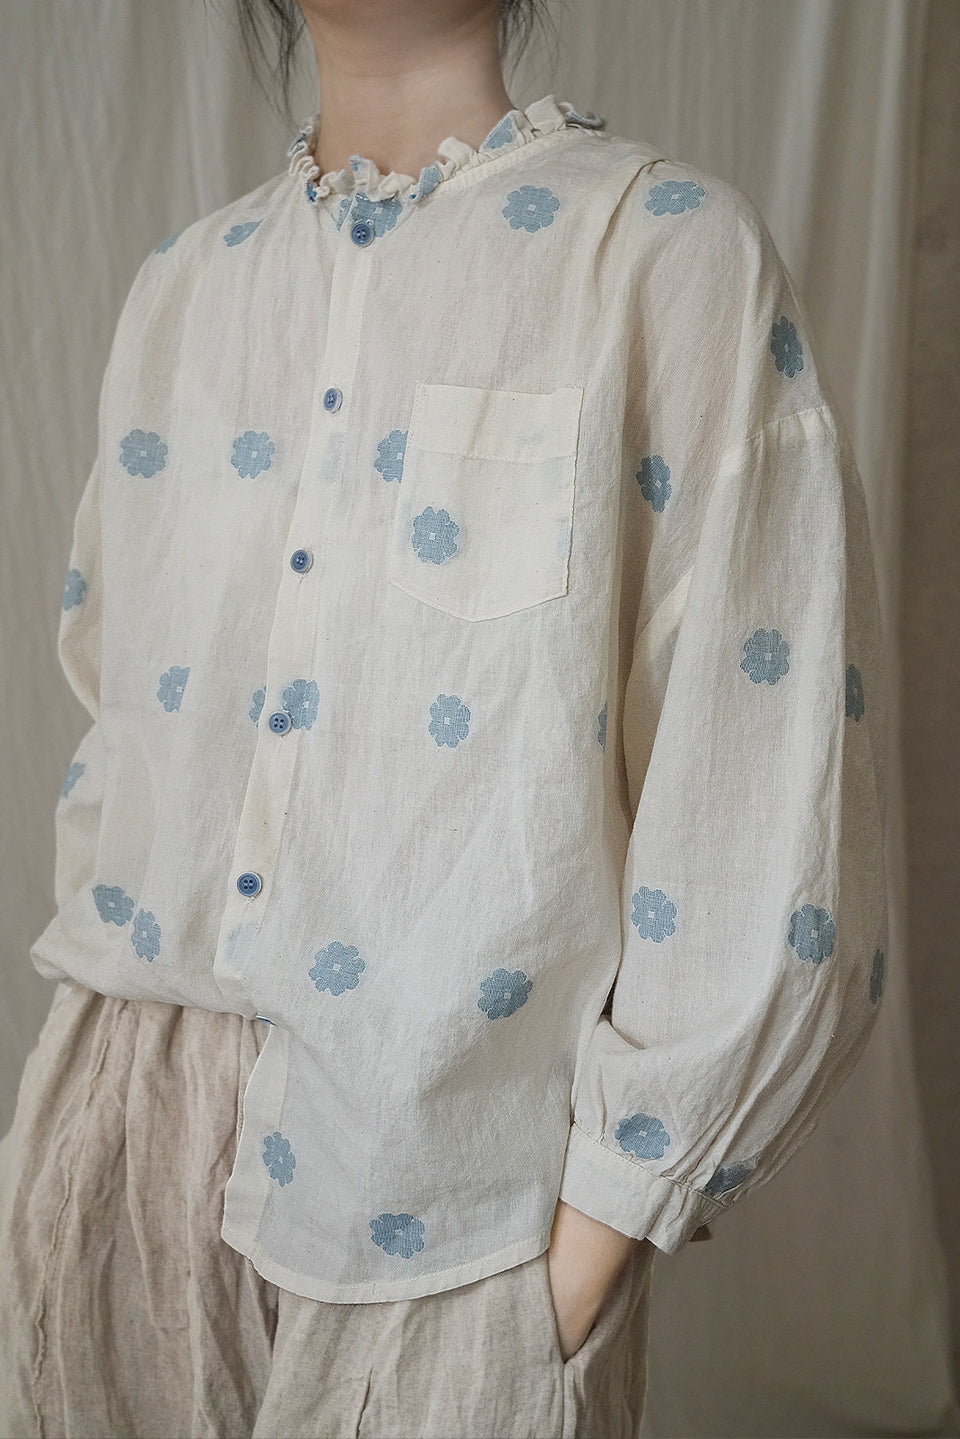 Daisy Jacquard Vintage French style loose fit blouse